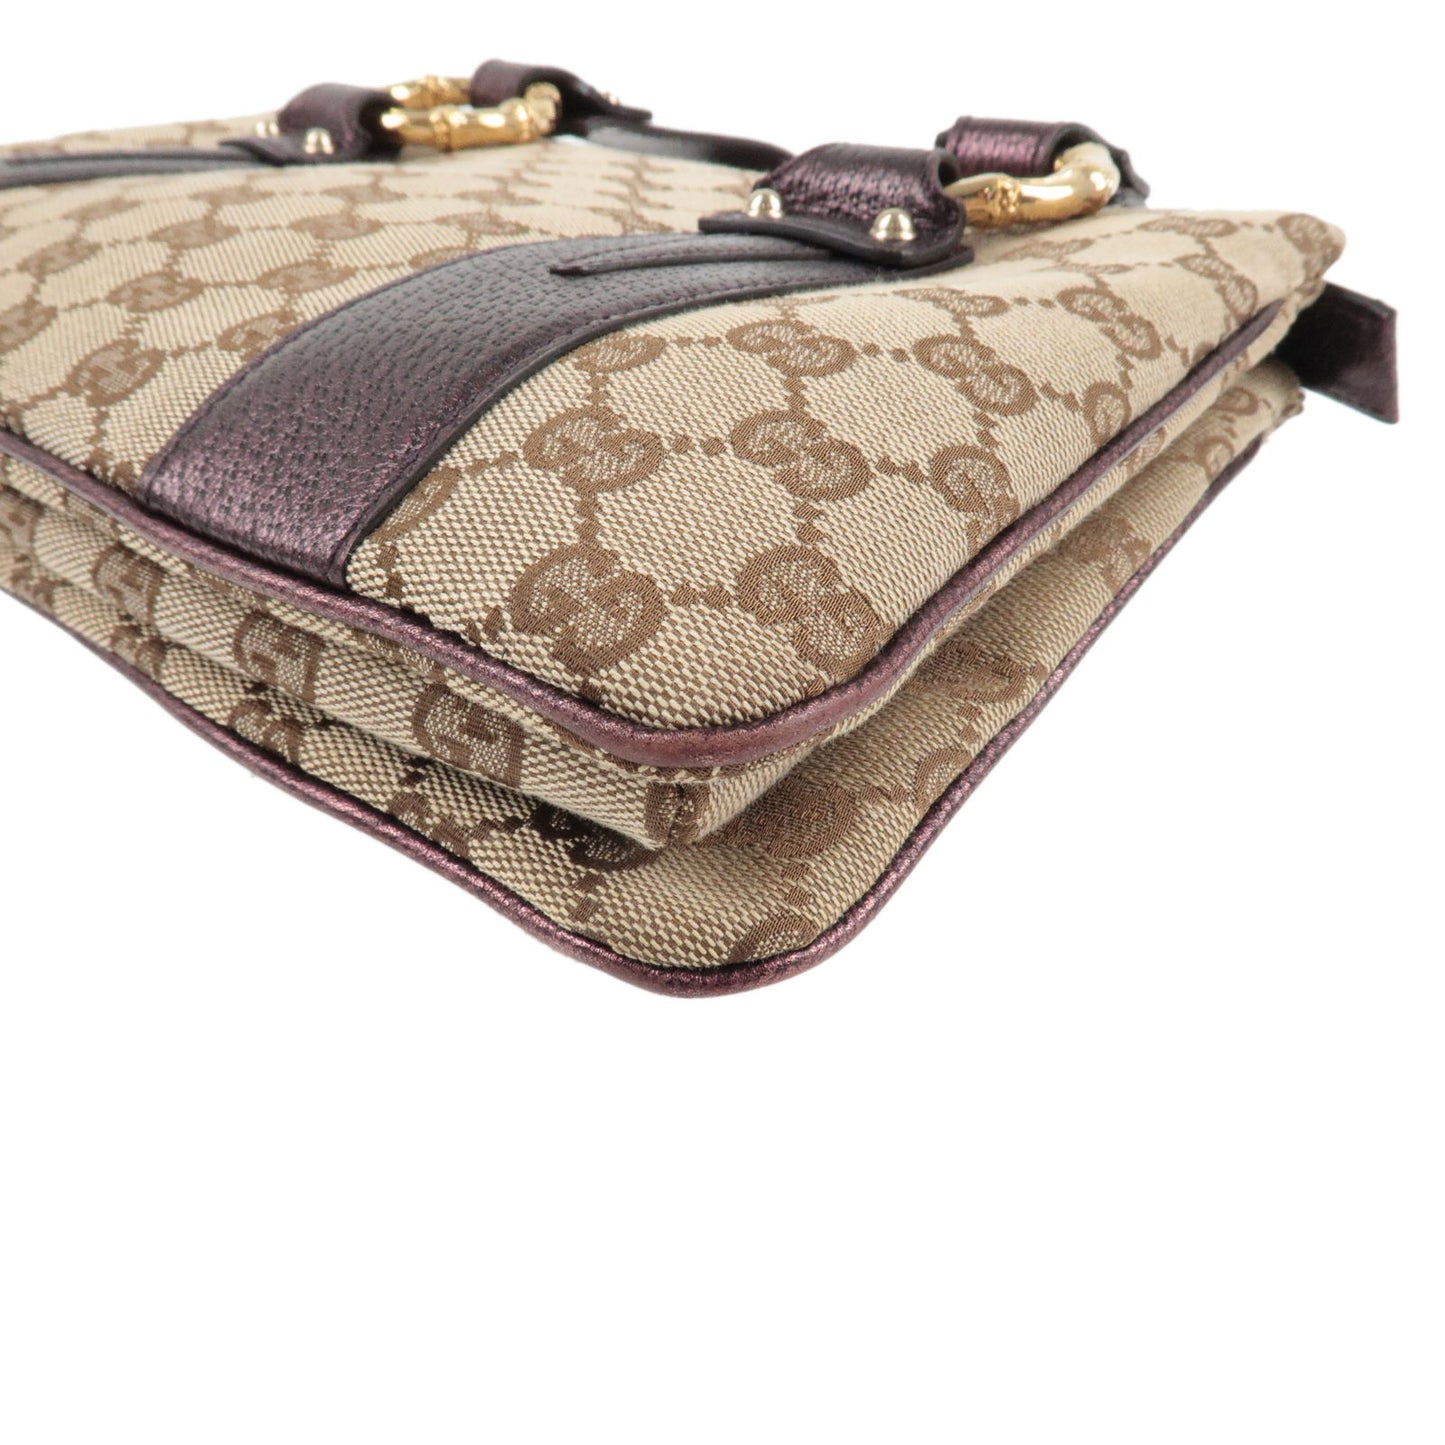 GUCCI GG Canvas Leather Hand Bag Purple Beige Brown 131324